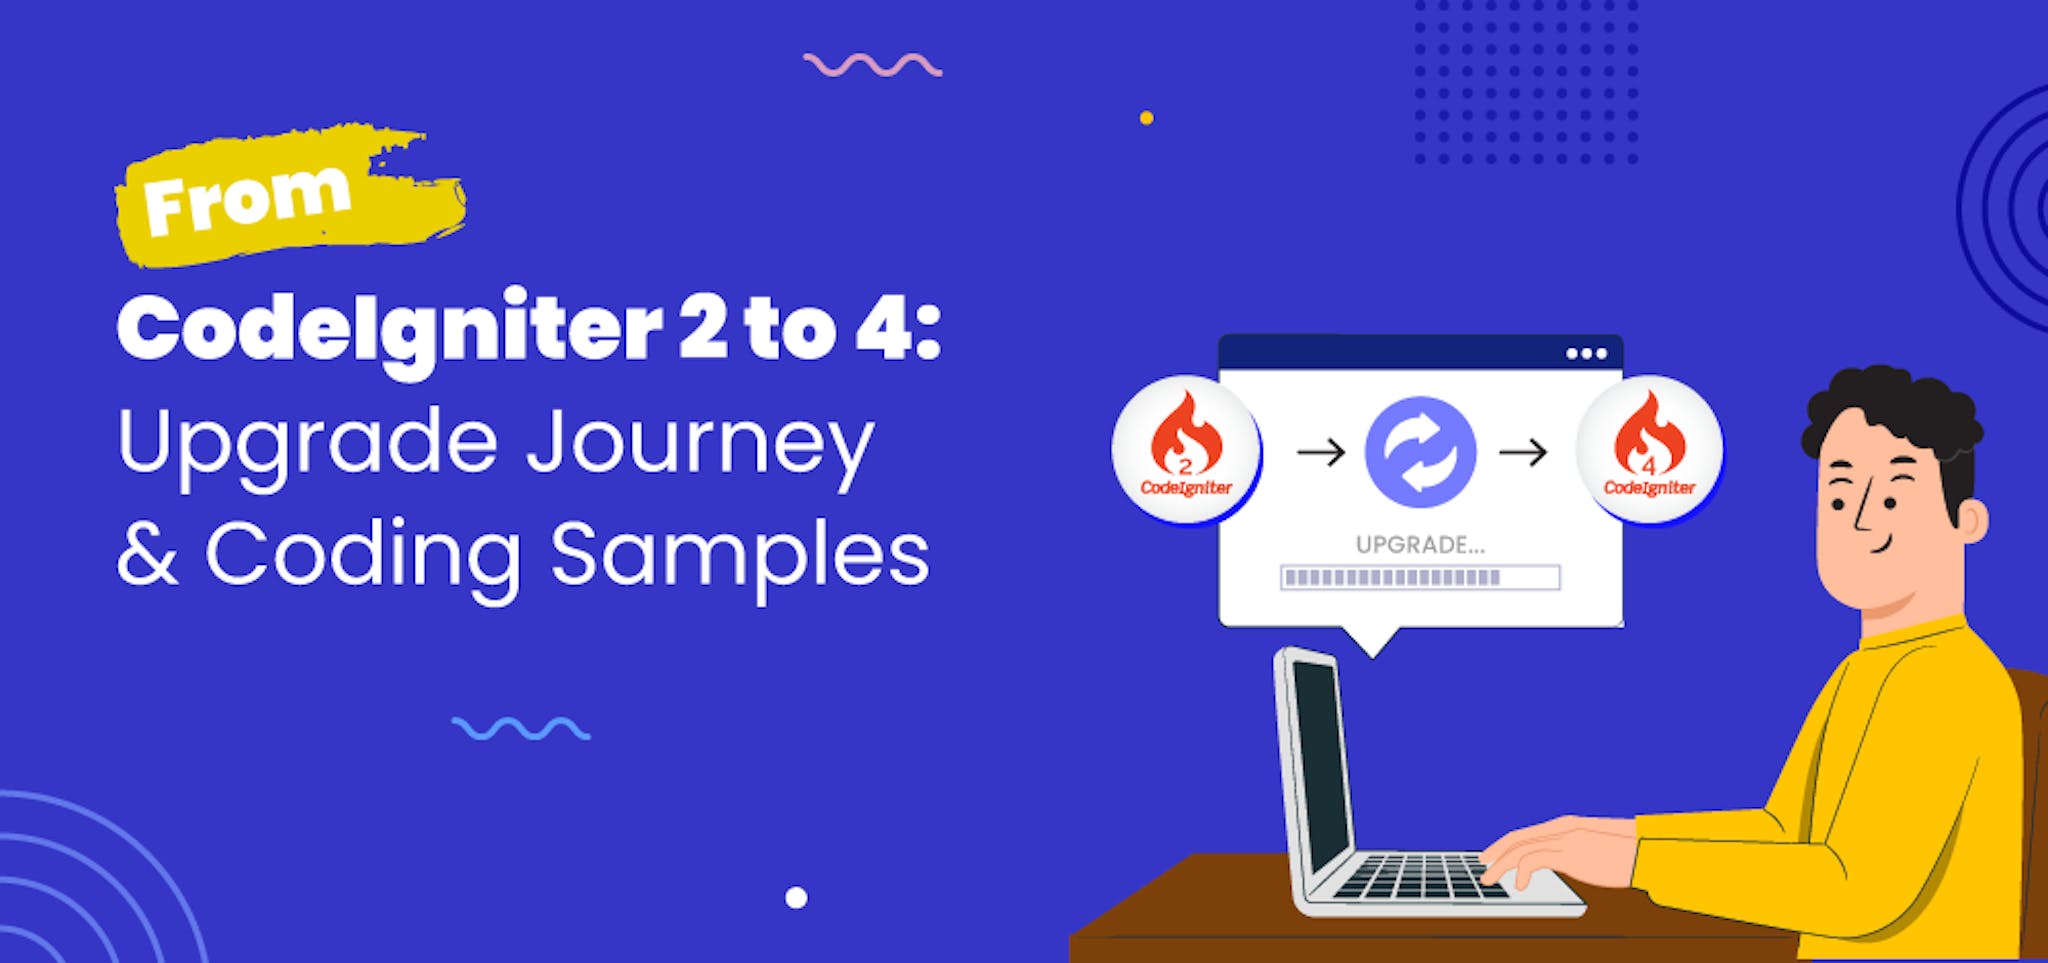 featured image - From CodeIgniter 2 to 4: Upgrade Journey & Coding Samples